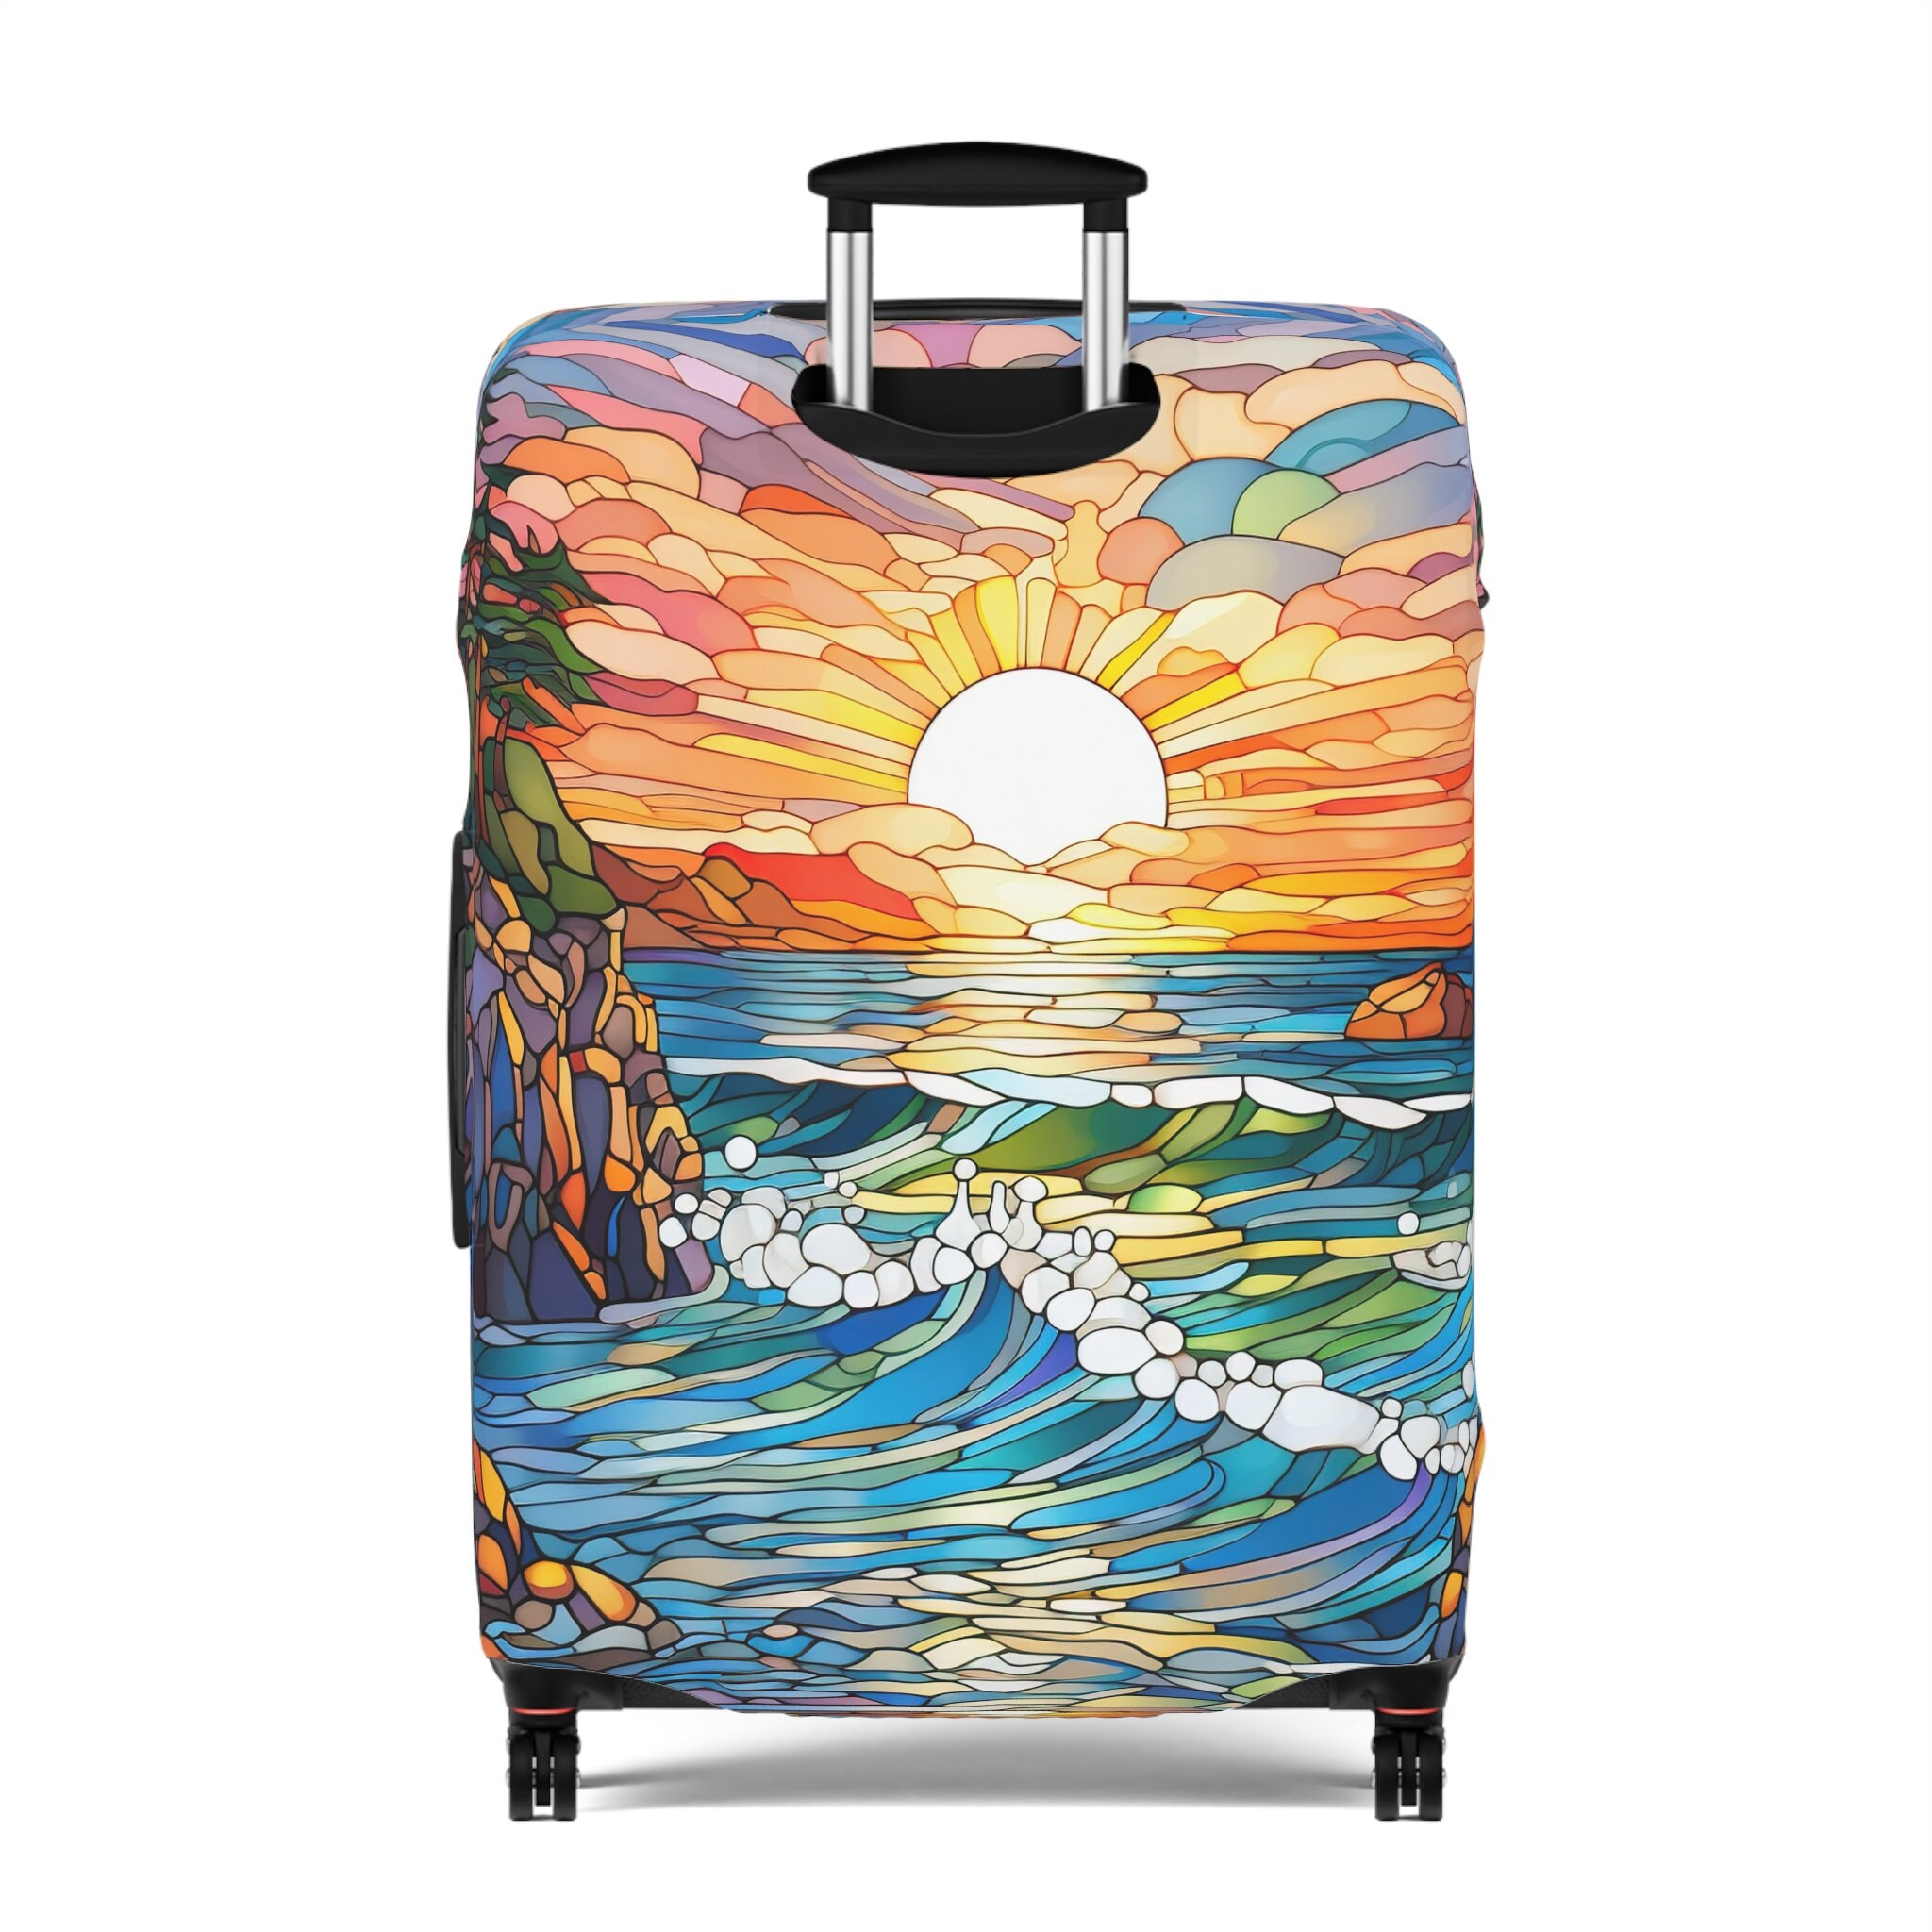 Tropical Beach Luggage Cover, Summer Travel Luggage Cover